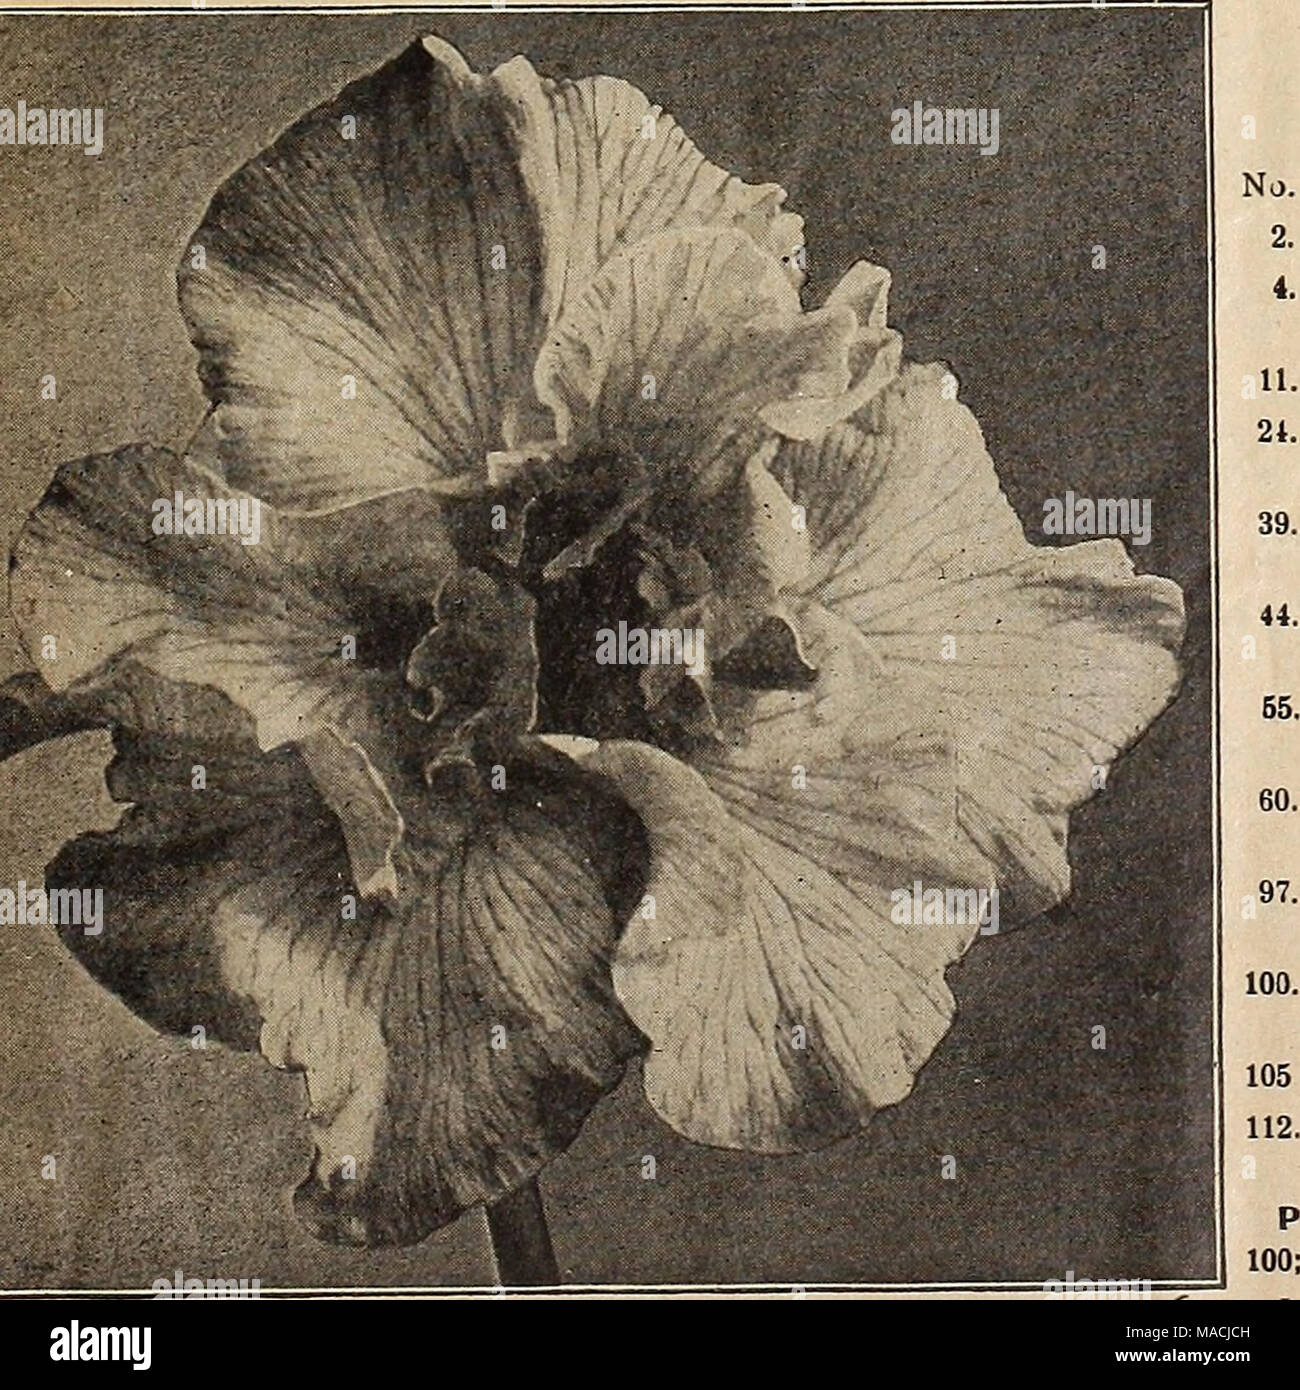 . Dreer's wholesale price list : bulbs for florists plants for florists flower seeds for florists florists' requisites . JAPANESE IRIS Dreer's Imperial Japanese Iris Order by name or number. Tora-odorl. Pure white, faintly traced with violet. Yomo-no-uml. A fine, free-flowering early creamy-white, 6 petals. Hano-no-nlshlkl. Bright violet; white veinings. Qosetsu-Mal. White, veined and traced aniline blue, 6 petals. FukUyose. Light ground color, marbled with aniline blue; 6 petals. Yoshlmo. Creamy-white, delicately veined with violet, 6 petals. Shuchlukwa. Crimson-purple with large white veins  Stock Photo